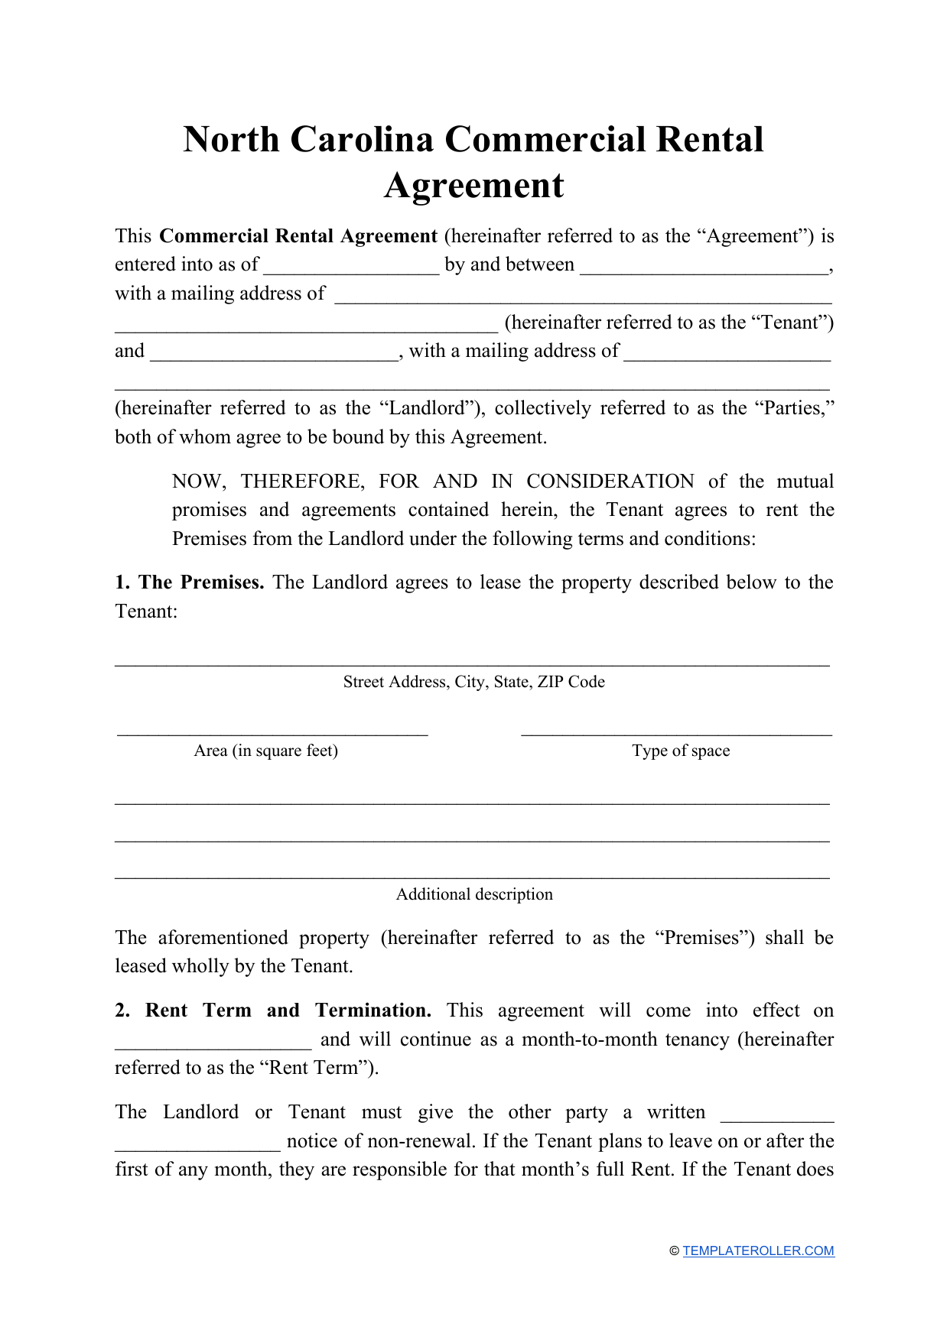 Commercial Rental Agreement Template - North Carolina, Page 1